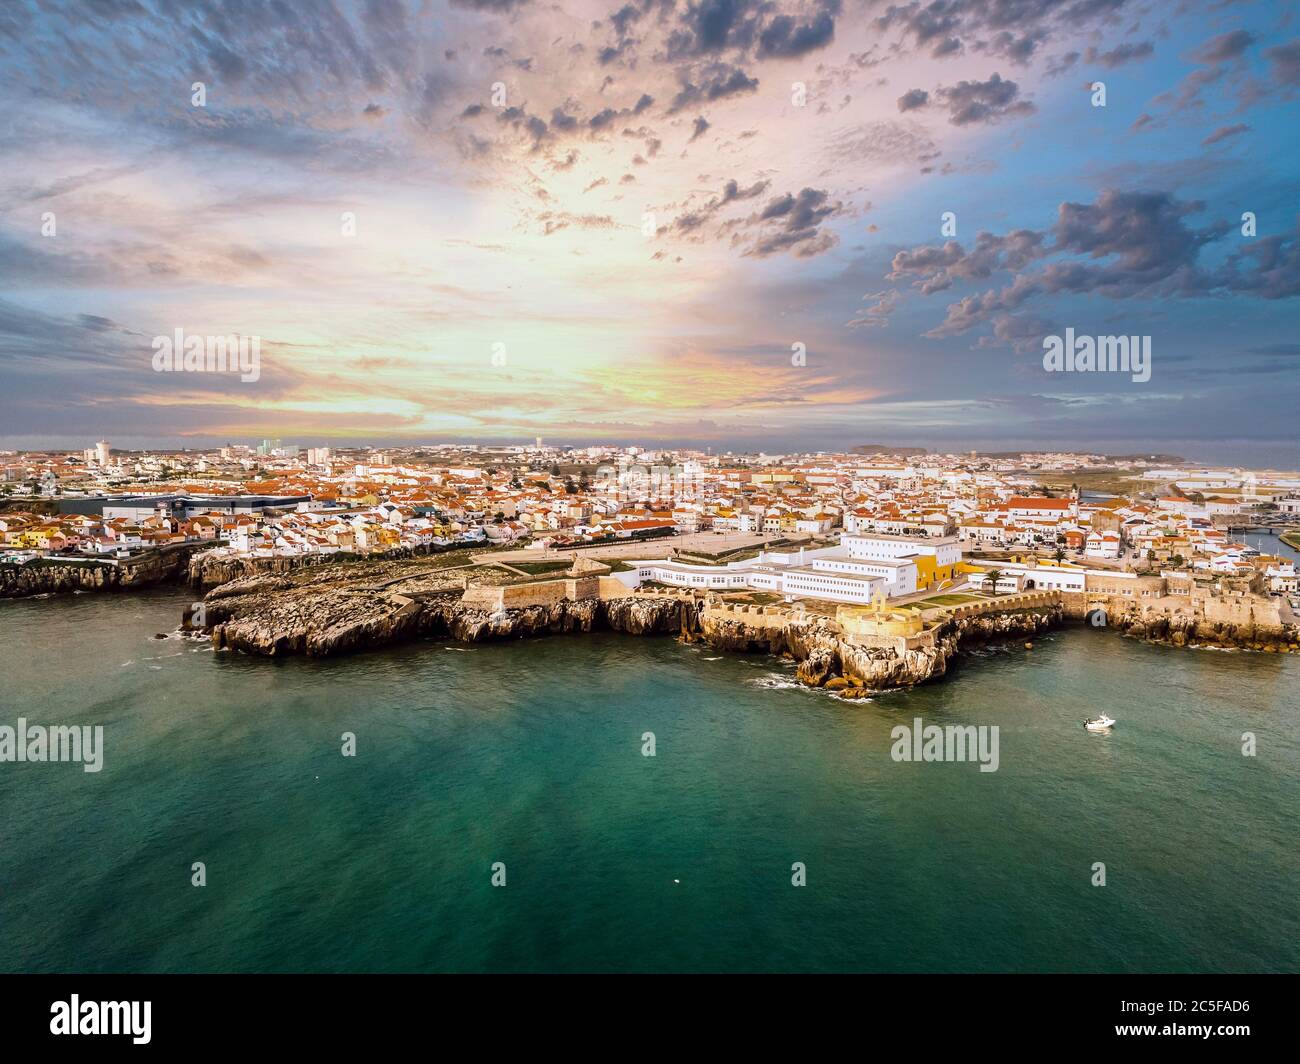 Aerial view, city view with fortress, peninsula with high cliffs, Peniche, Centro region, Portugal Stock Photo